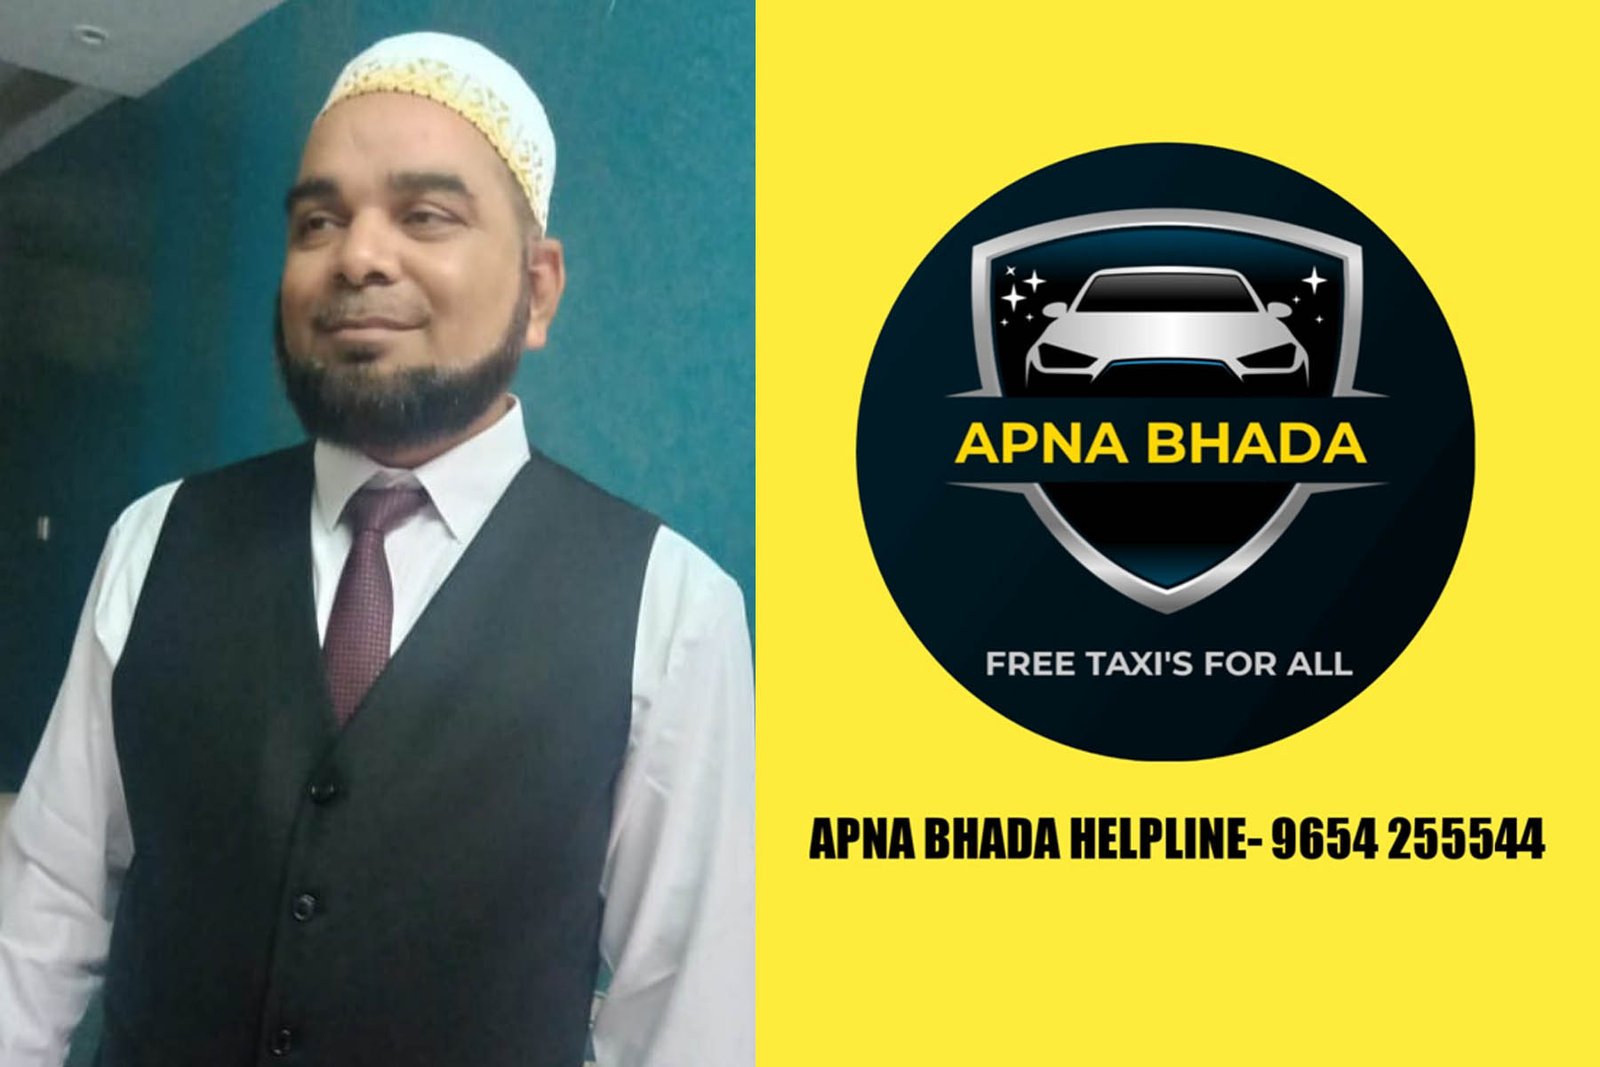 Apna Bhada launched affordable Advertising